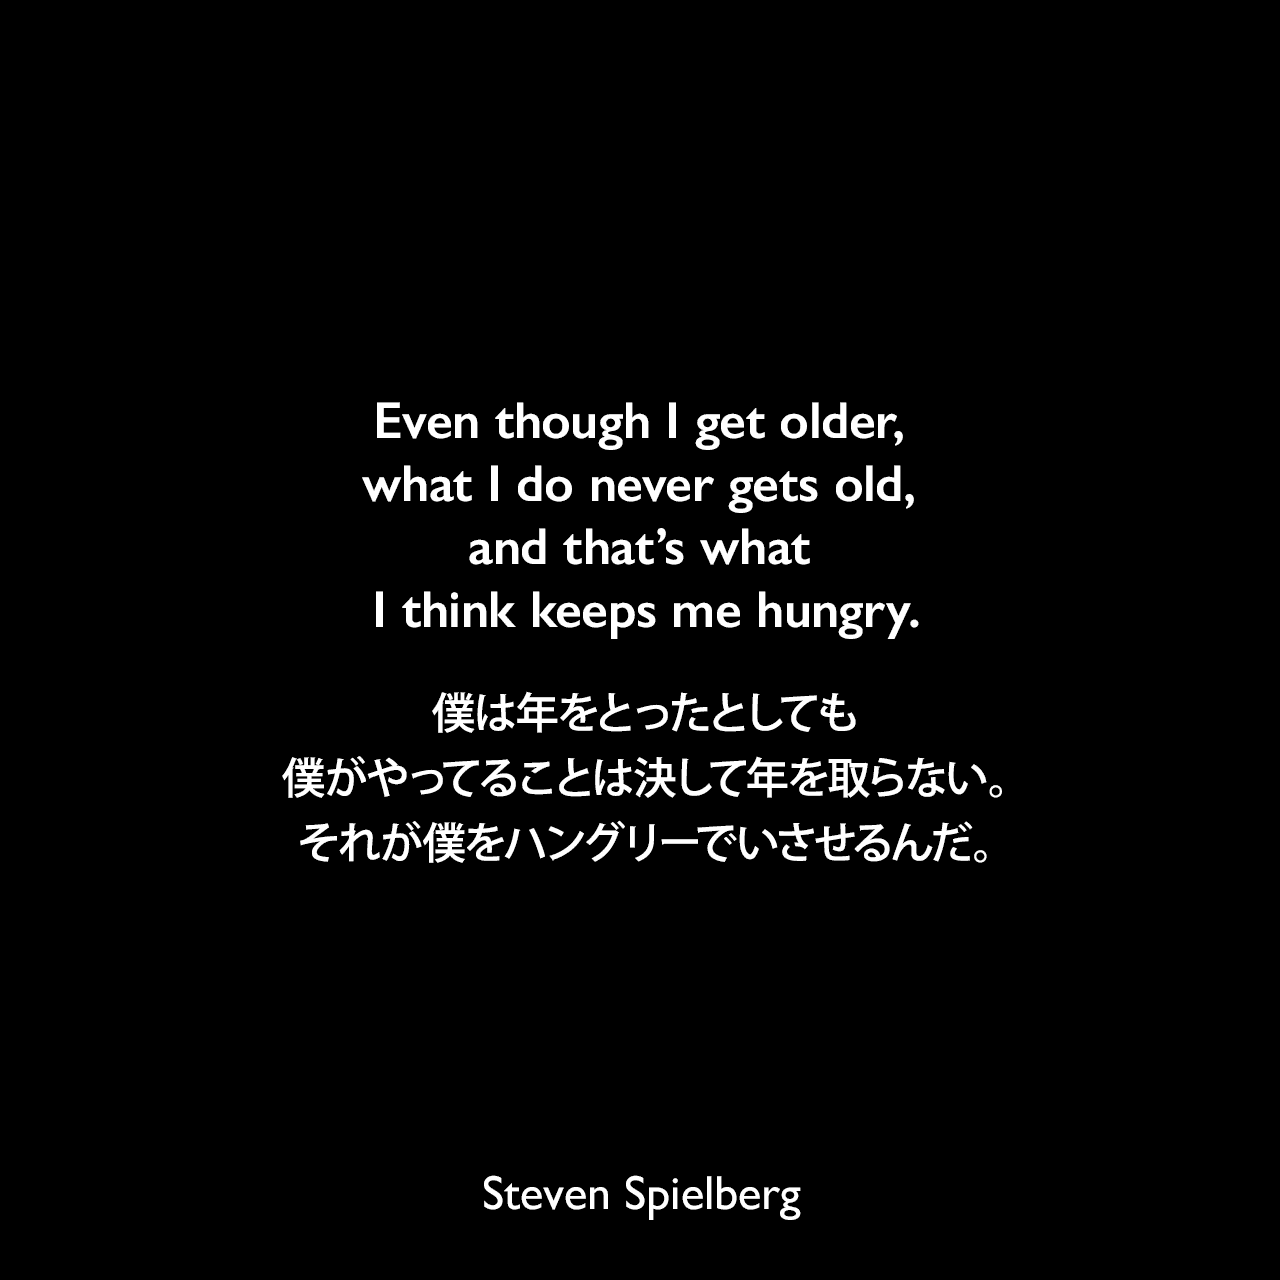 Even though I get older, what I do never gets old, and that’s what I think keeps me hungry.僕は年をとったとしても、僕がやってることは決して年を取らない。それが僕をハングリーでいさせるんだ。Steven Spielberg